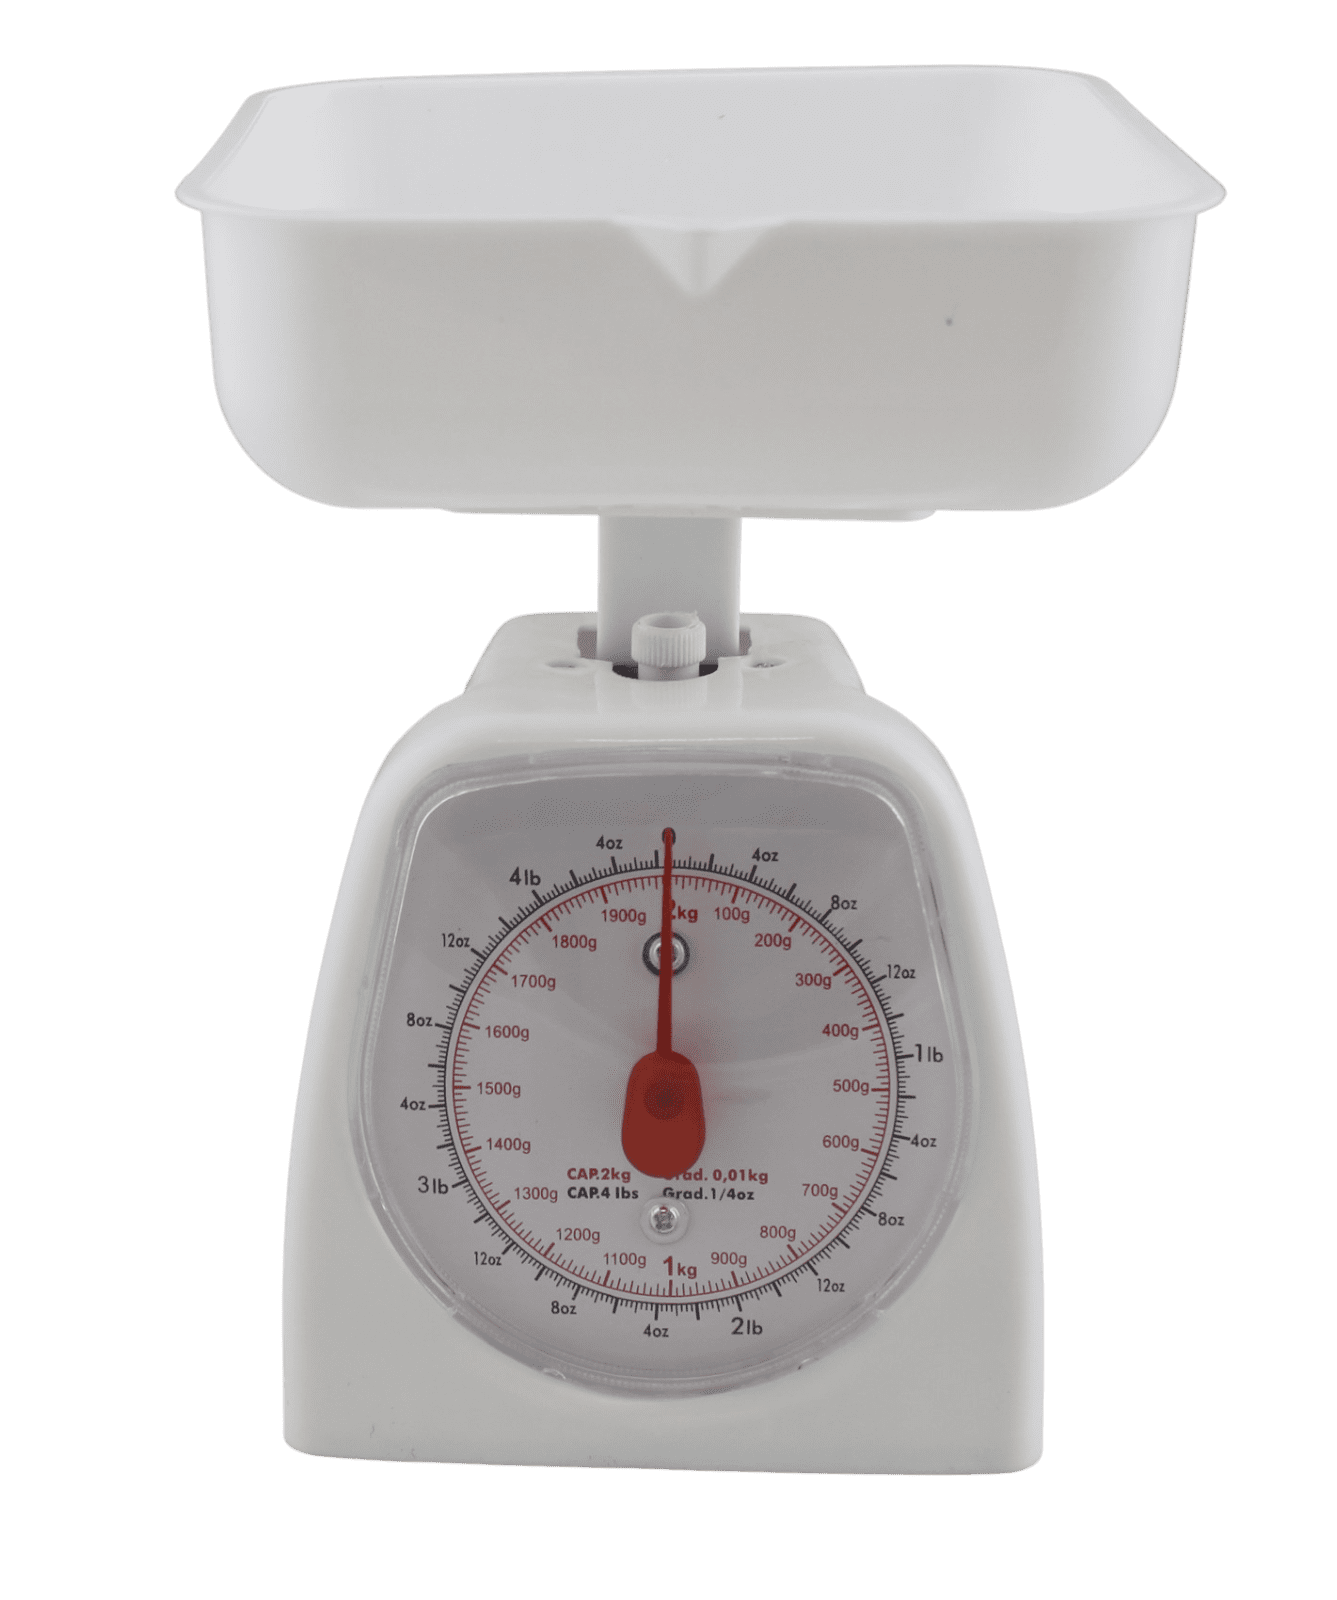 Tada 11lb Precise Portions Analog Food Scale Stainless Steel Mechanical  Kitchen Scale, Removable Bowl, Tare Function, Retro Style, Kitchen Friendly